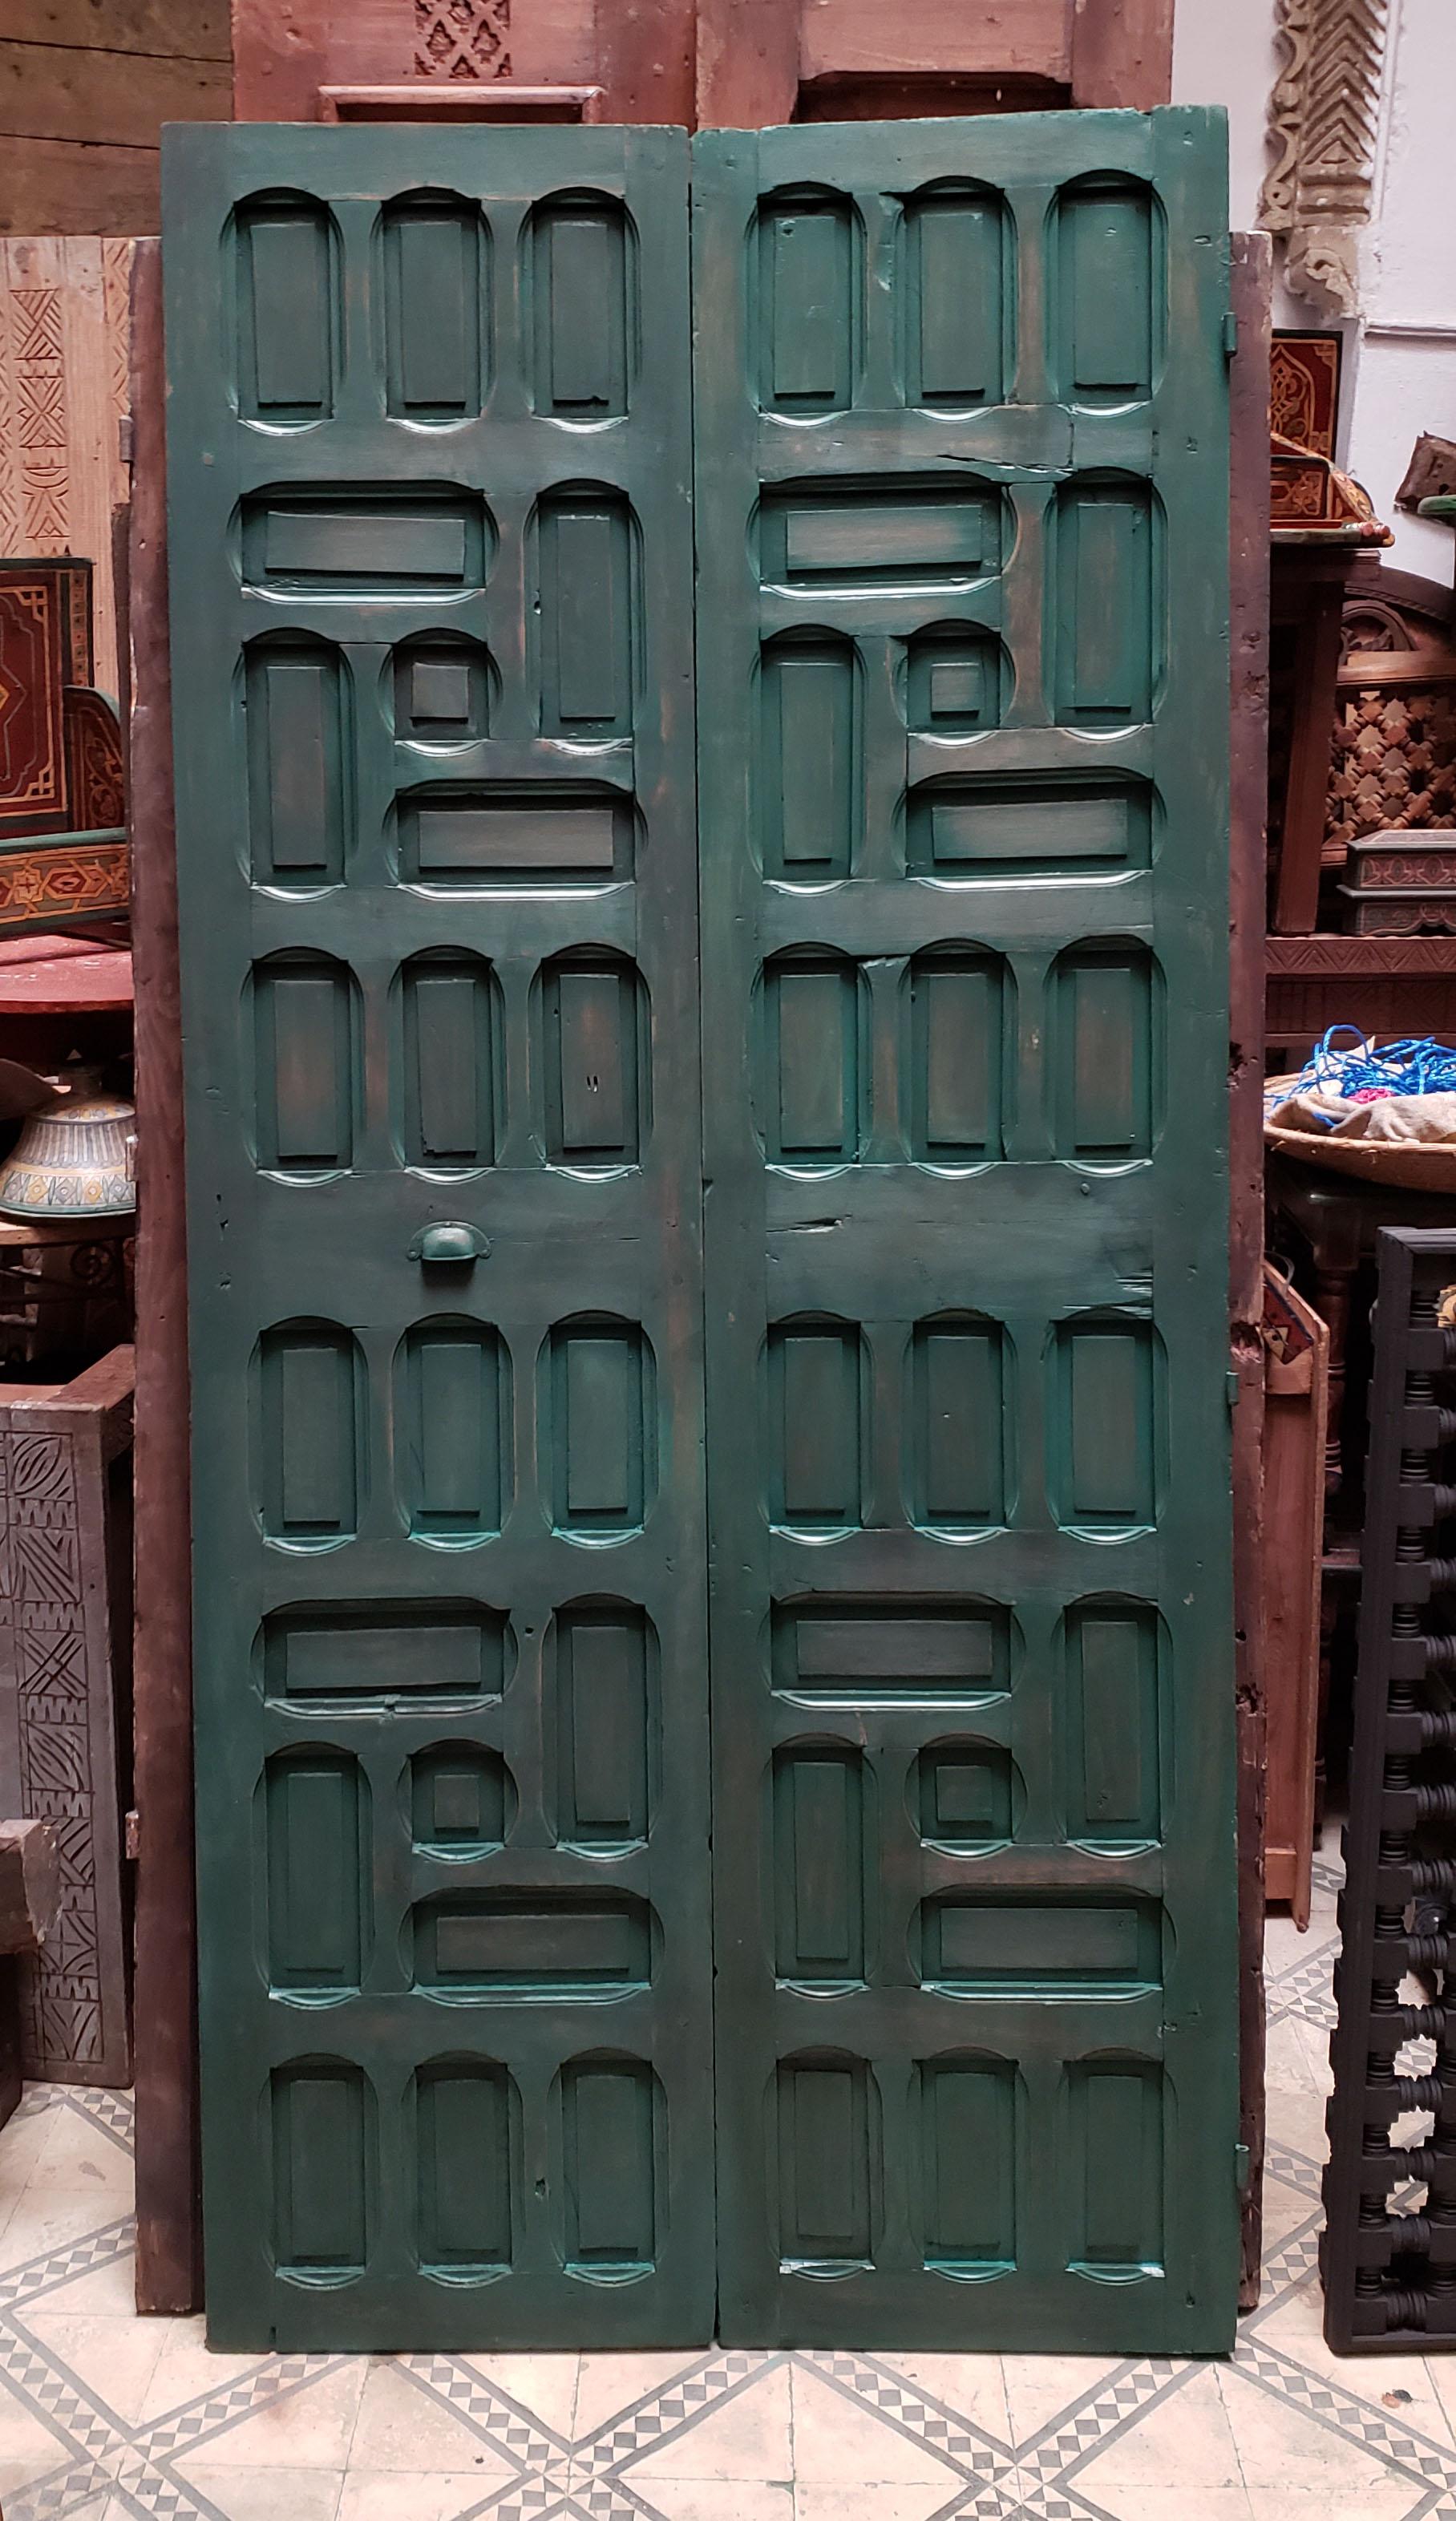 Another amazing double panel Moroccan door measuring approximately 84